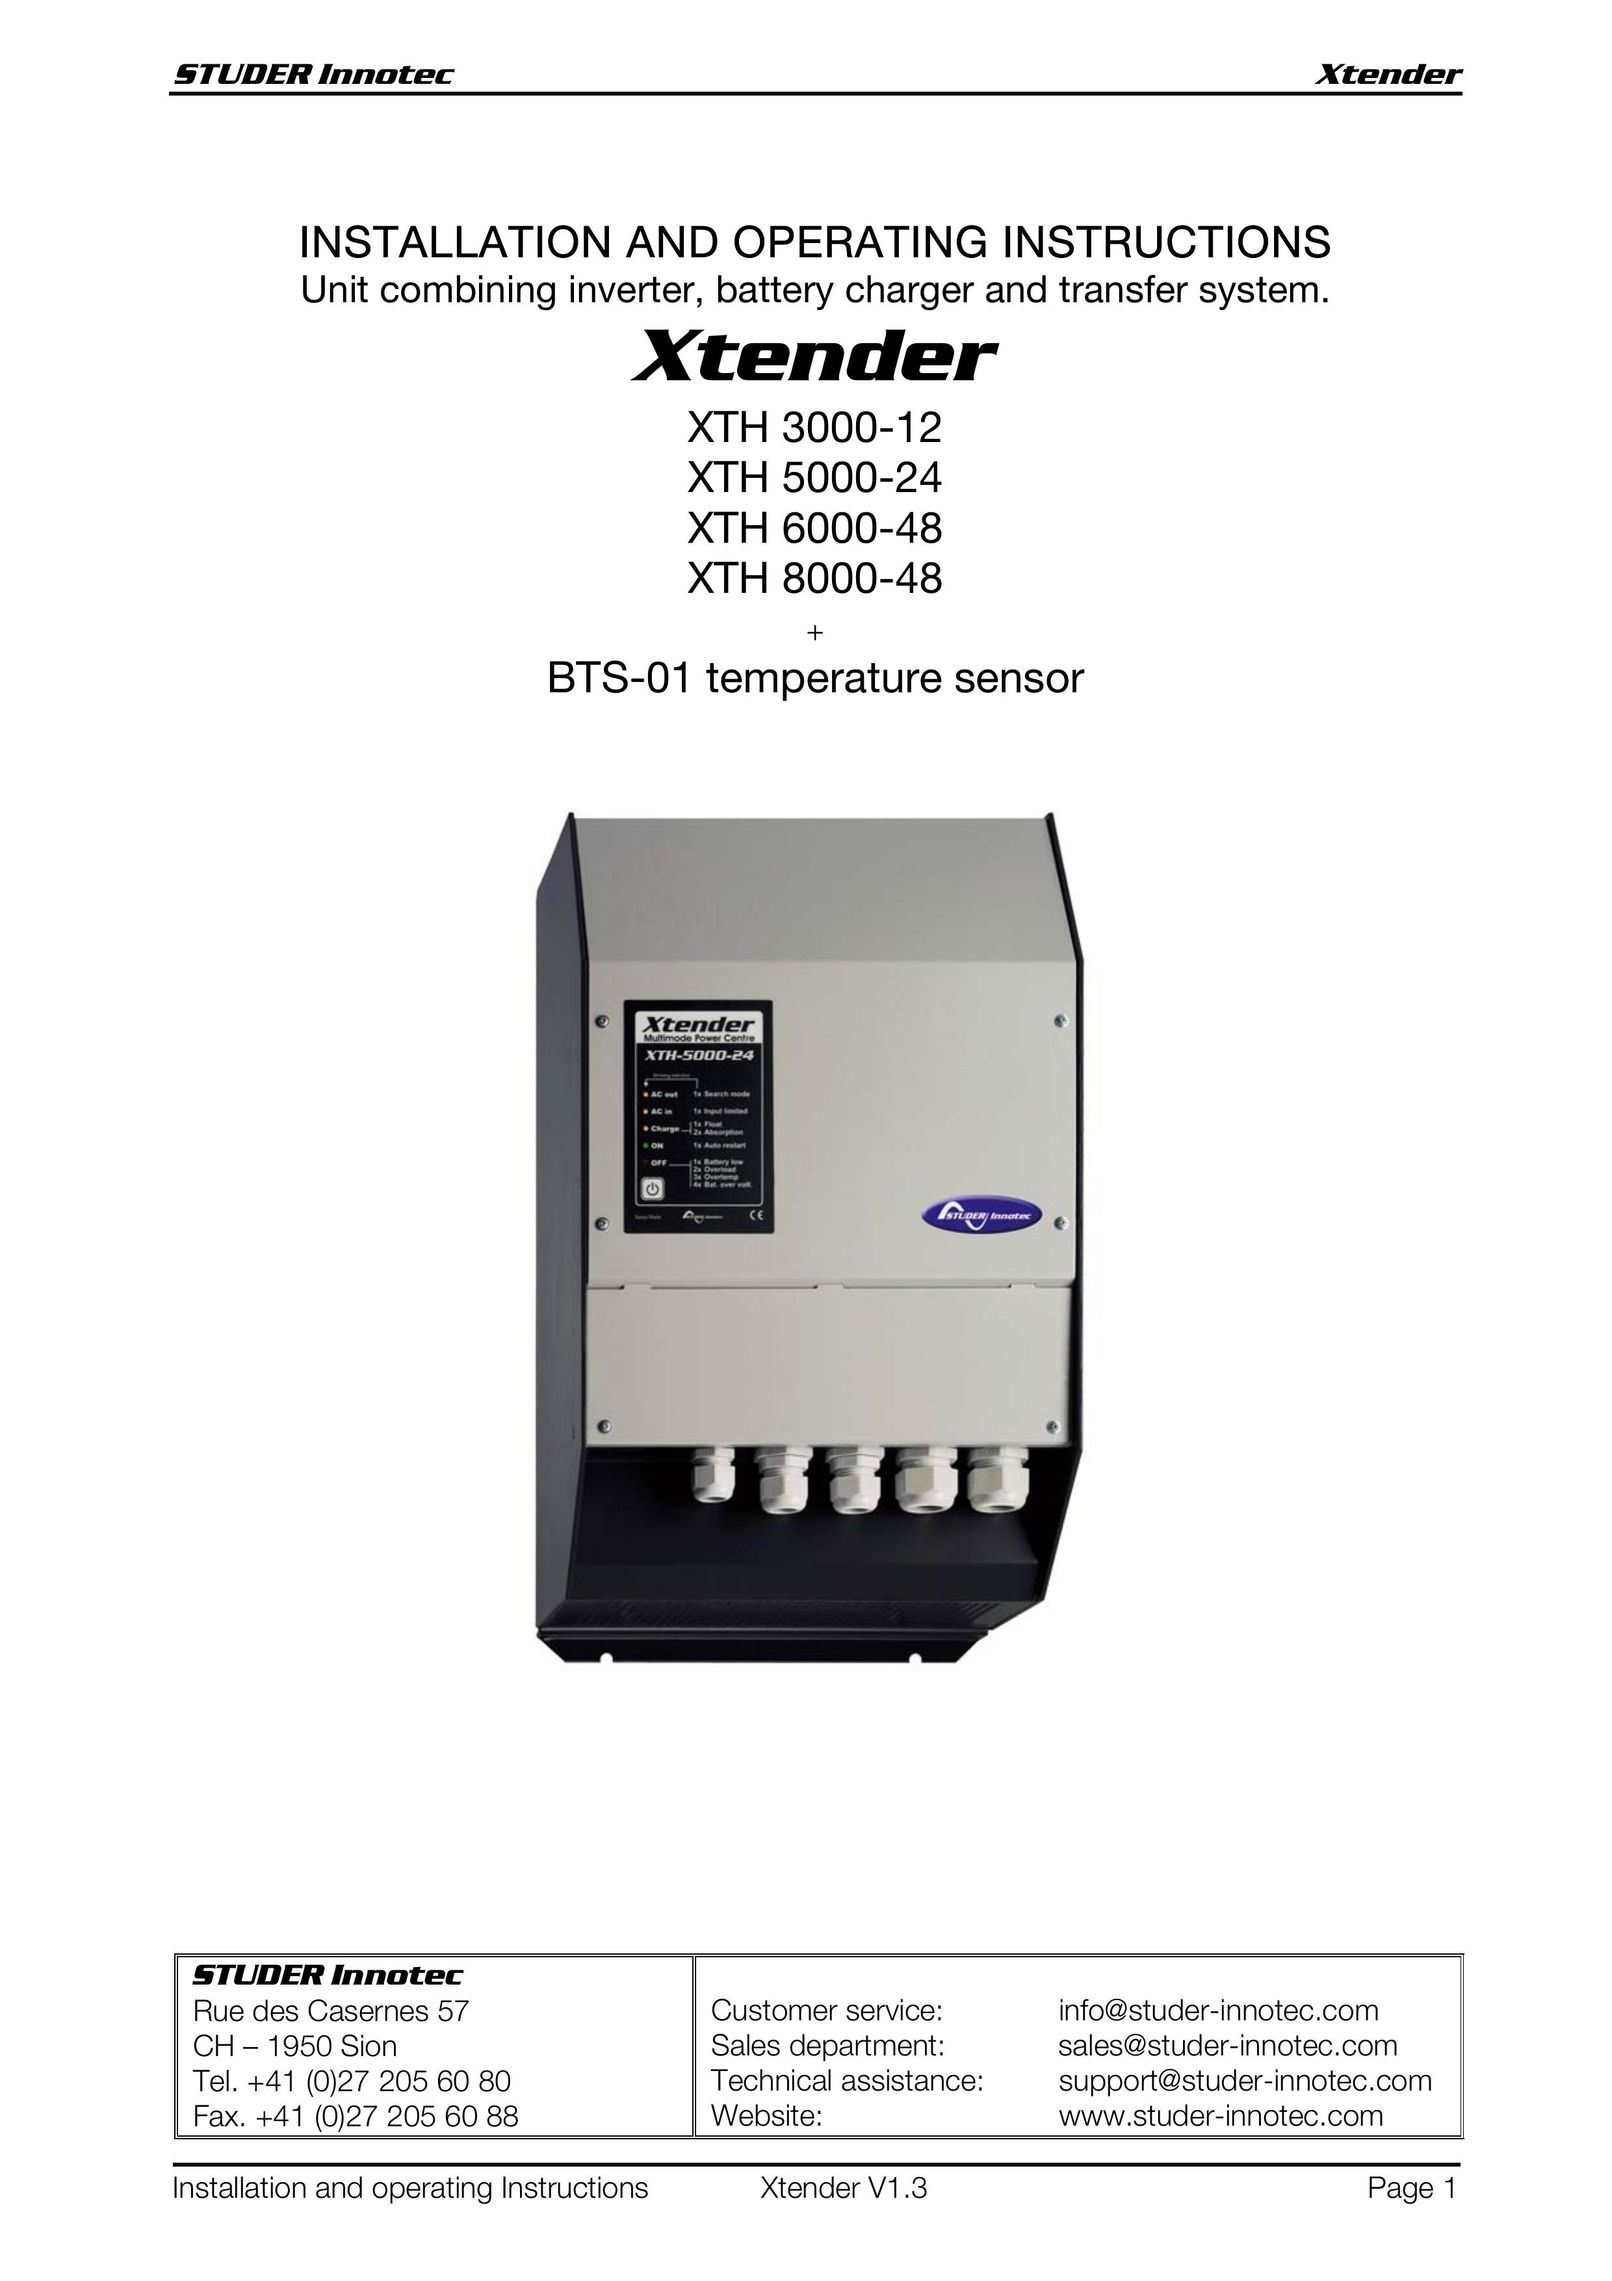 Studer Innotec XTH 8000-48 Battery Charger User Manual